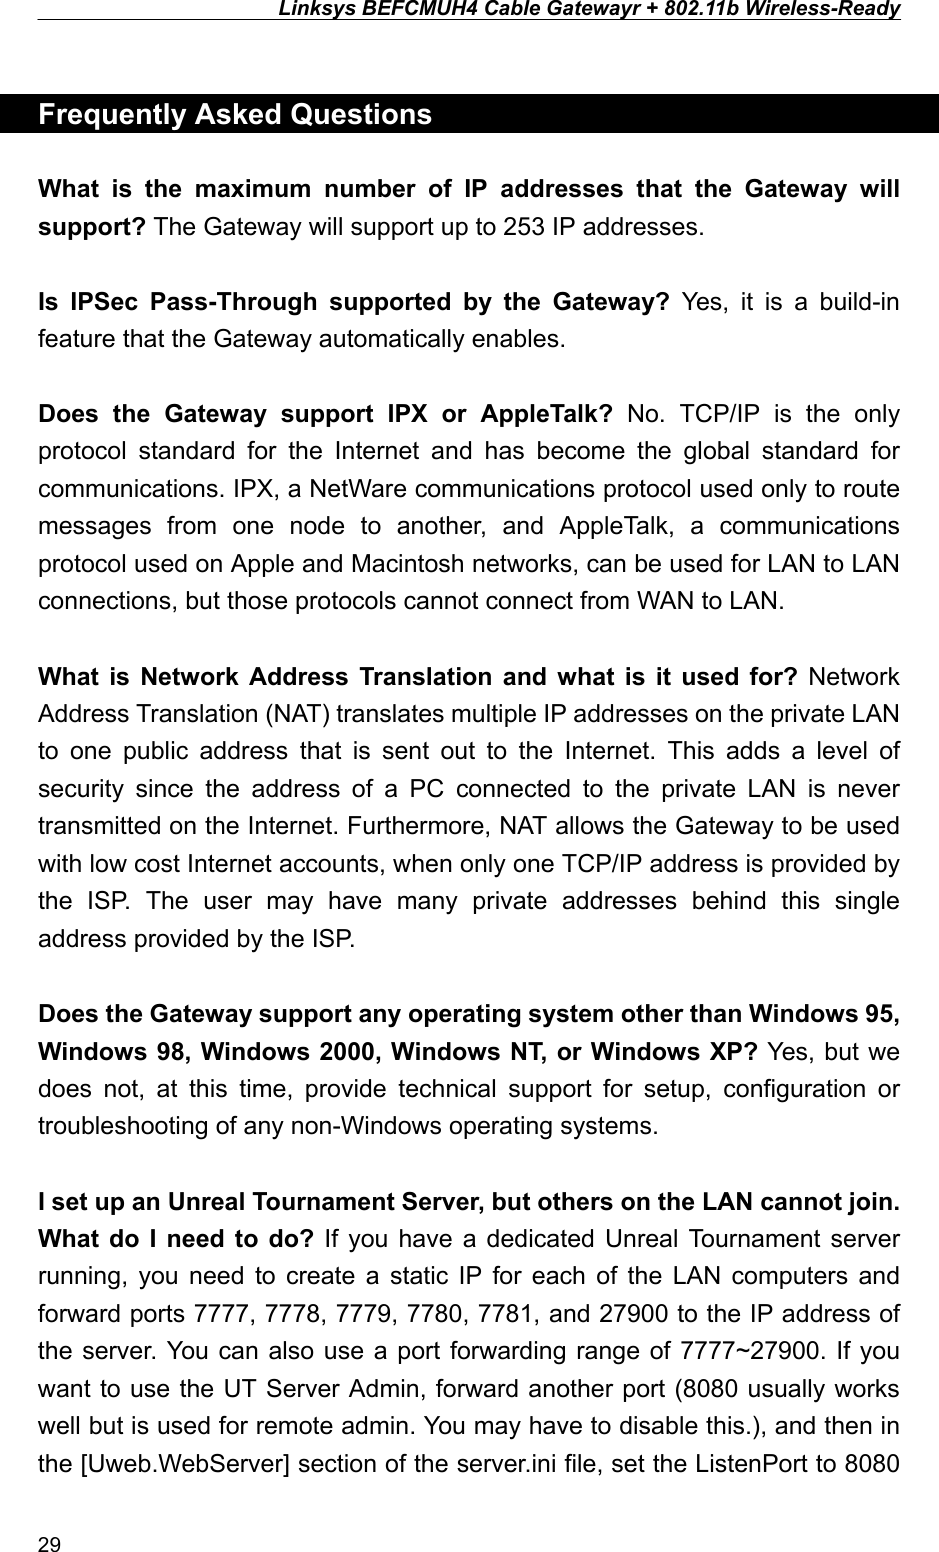 Linksys BEFCMUH4 Cable Gatewayr + 802.11b Wireless-Ready   Frequently Asked Questions  What is the maximum number of IP addresses that the Gateway will support? The Gateway will support up to 253 IP addresses.  Is IPSec Pass-Through supported by the Gateway? Yes, it is a build-in feature that the Gateway automatically enables.  Does the Gateway support IPX or AppleTalk? No. TCP/IP is the only protocol standard for the Internet and has become the global standard for communications. IPX, a NetWare communications protocol used only to route messages from one node to another, and AppleTalk, a communications protocol used on Apple and Macintosh networks, can be used for LAN to LAN connections, but those protocols cannot connect from WAN to LAN.  What is Network Address Translation and what is it used for? Network Address Translation (NAT) translates multiple IP addresses on the private LAN to one public address that is sent out to the Internet. This adds a level of security since the address of a PC connected to the private LAN is never transmitted on the Internet. Furthermore, NAT allows the Gateway to be used with low cost Internet accounts, when only one TCP/IP address is provided by the ISP. The user may have many private addresses behind this single address provided by the ISP.  Does the Gateway support any operating system other than Windows 95, Windows 98, Windows 2000, Windows NT, or Windows XP? Yes, but we does not, at this time, provide technical support for setup, configuration or troubleshooting of any non-Windows operating systems.  I set up an Unreal Tournament Server, but others on the LAN cannot join. What do I need to do? If you have a dedicated Unreal Tournament server running, you need to create a static IP for each of the LAN computers and forward ports 7777, 7778, 7779, 7780, 7781, and 27900 to the IP address of the server. You can also use a port forwarding range of 7777~27900. If you want to use the UT Server Admin, forward another port (8080 usually works well but is used for remote admin. You may have to disable this.), and then in the [Uweb.WebServer] section of the server.ini file, set the ListenPort to 8080 29 